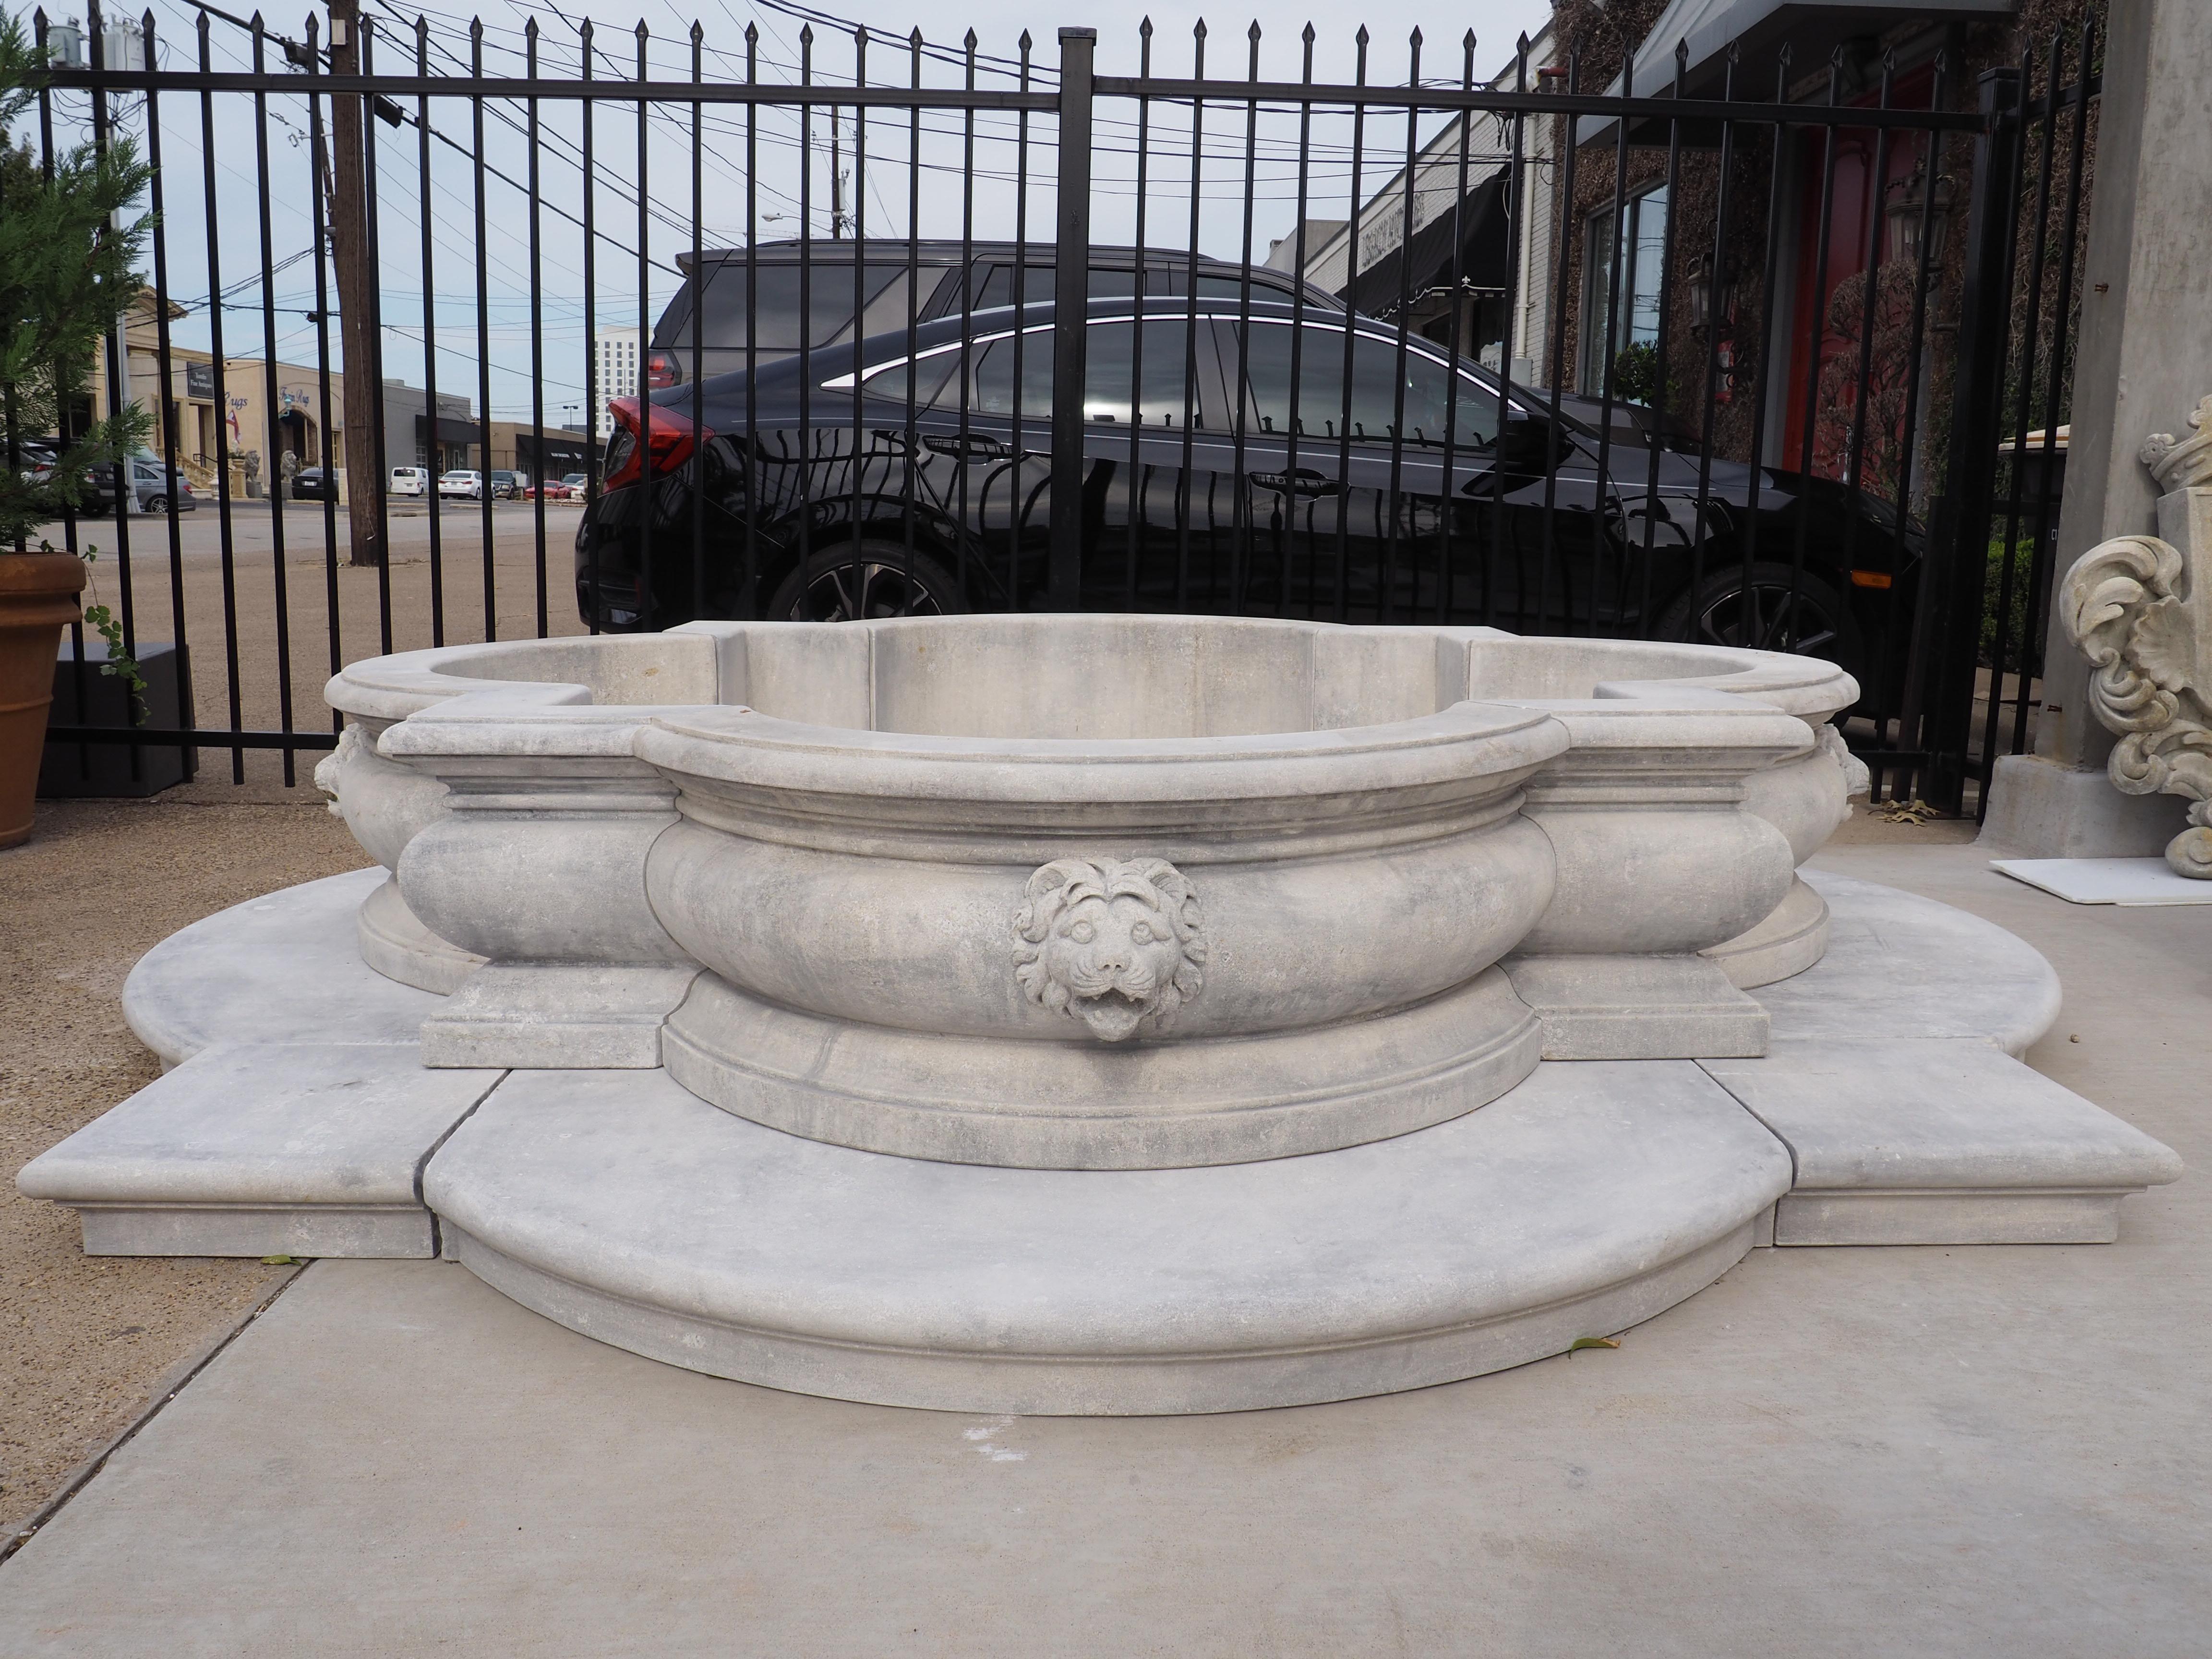 This versatile quadrilobed fountain basin is adorned with several styles of molding and lion mascarons. Hand-carved by an Italian stone mason, the basin wall can be described as a “barbed quatrefoil”, with angular points in between each lobe. The